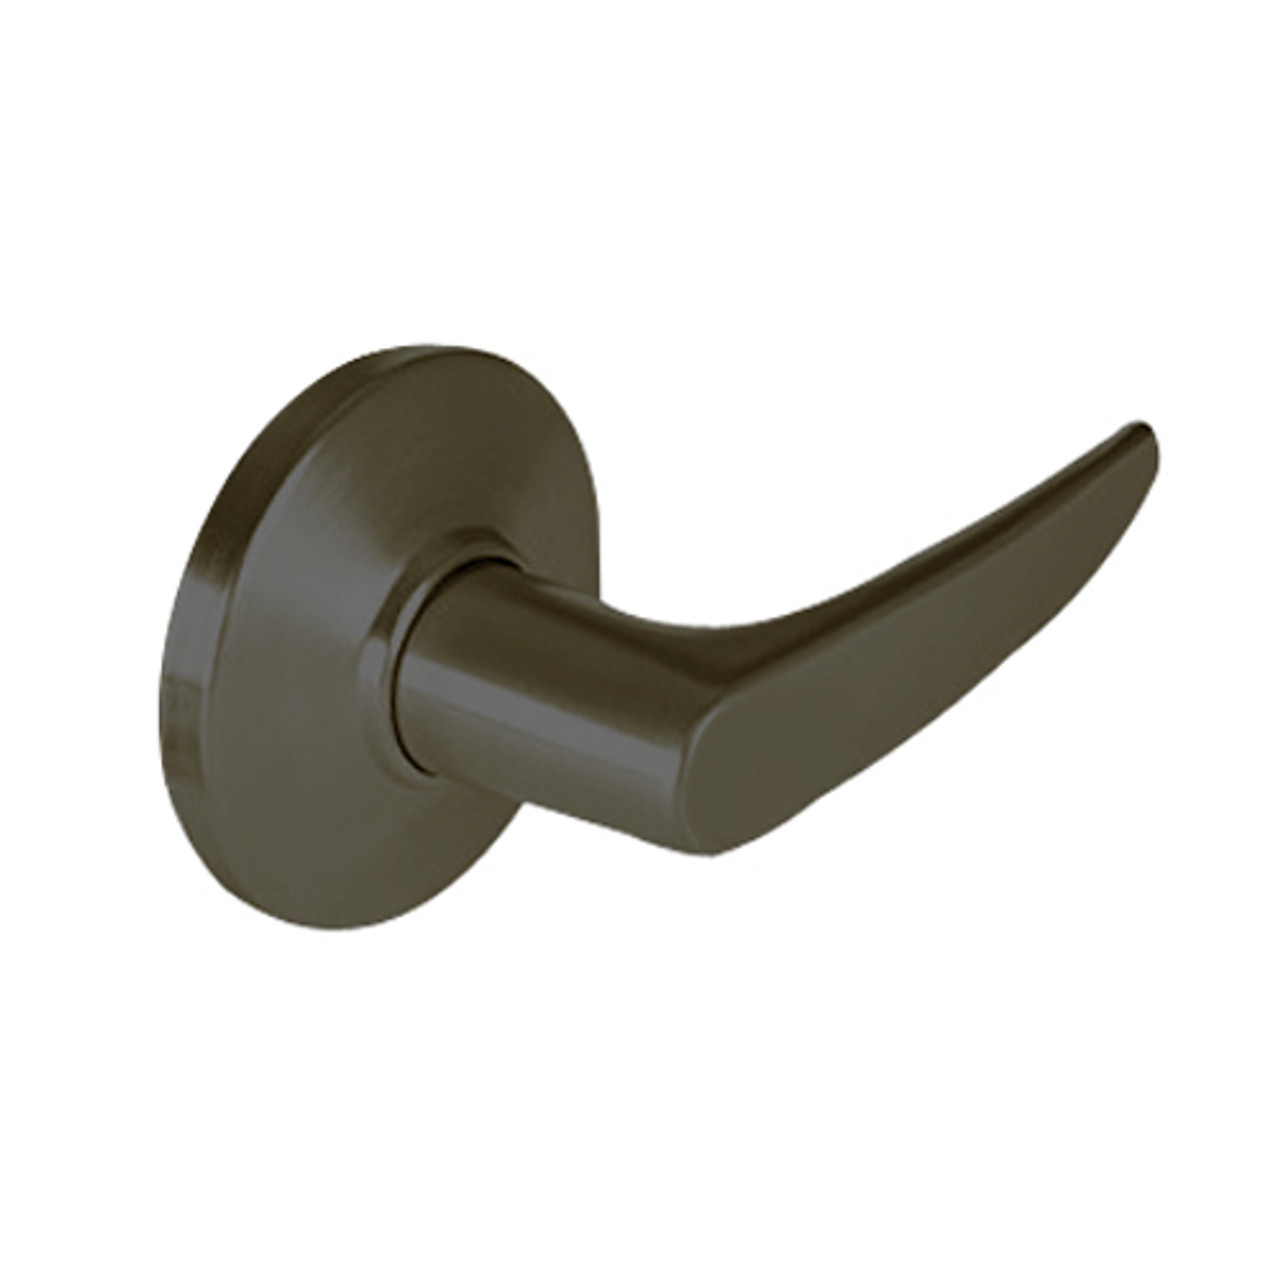 9K30M16DSTK613 Best 9K Series Communicating Heavy Duty Cylindrical Lever Locks with Curved Without Return Lever Design in Oil Rubbed Bronze